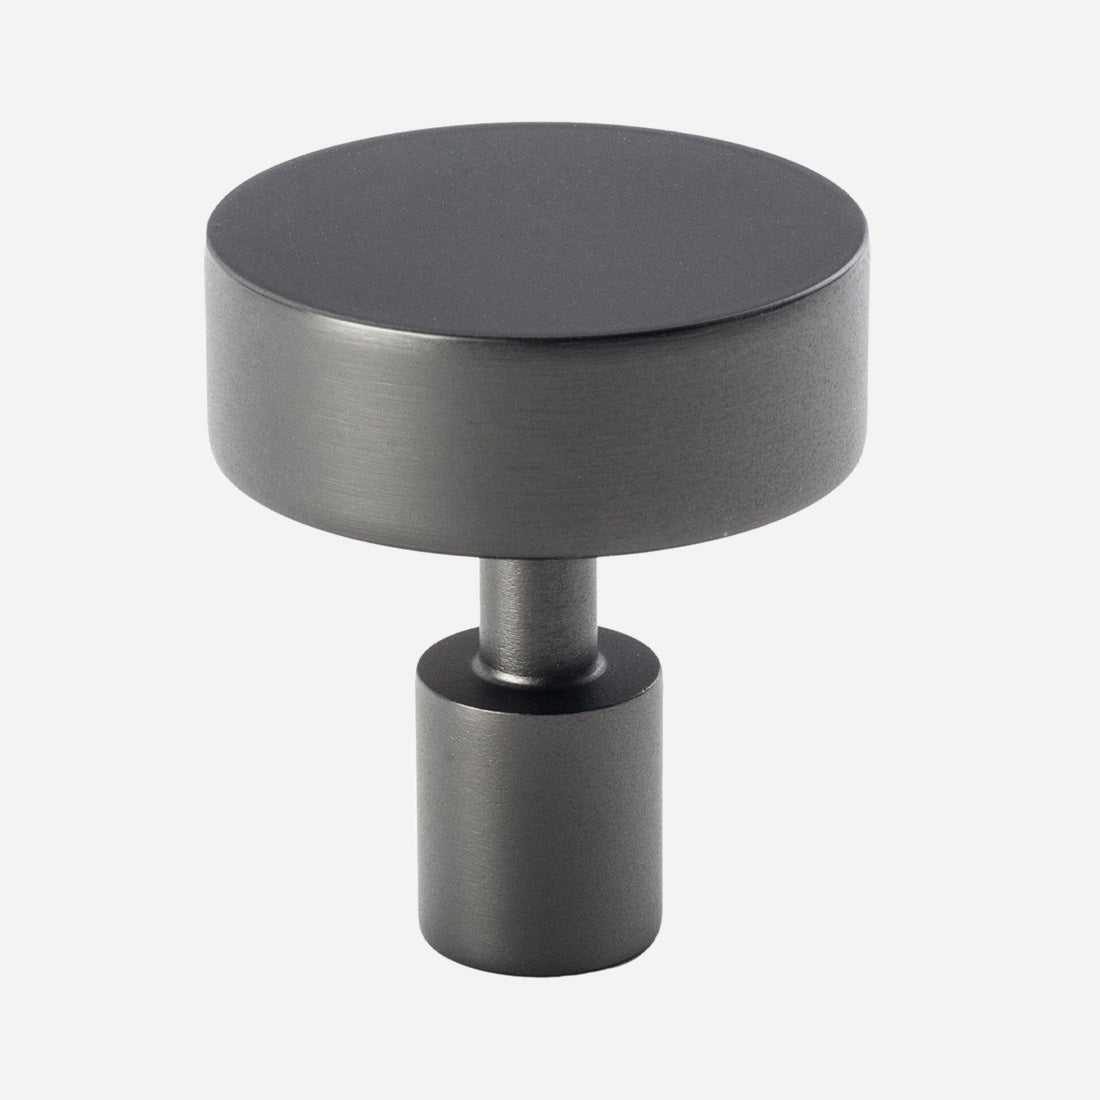 Black Stainless Steel Disc Cabinet Knob